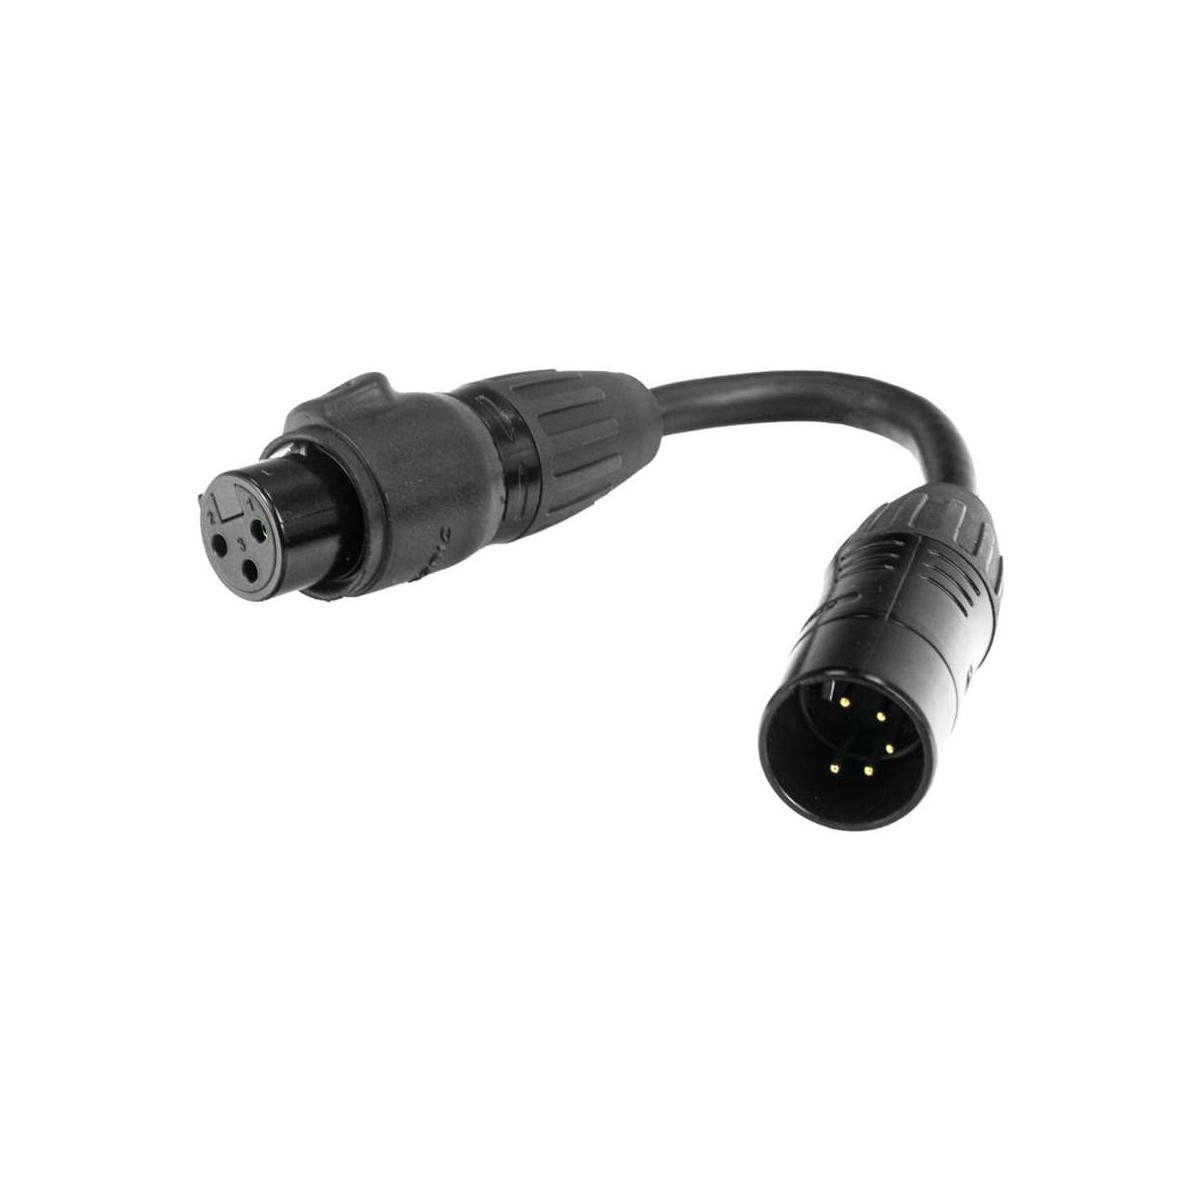 Accu-Cable DMX 3-pin female to 5-pin male